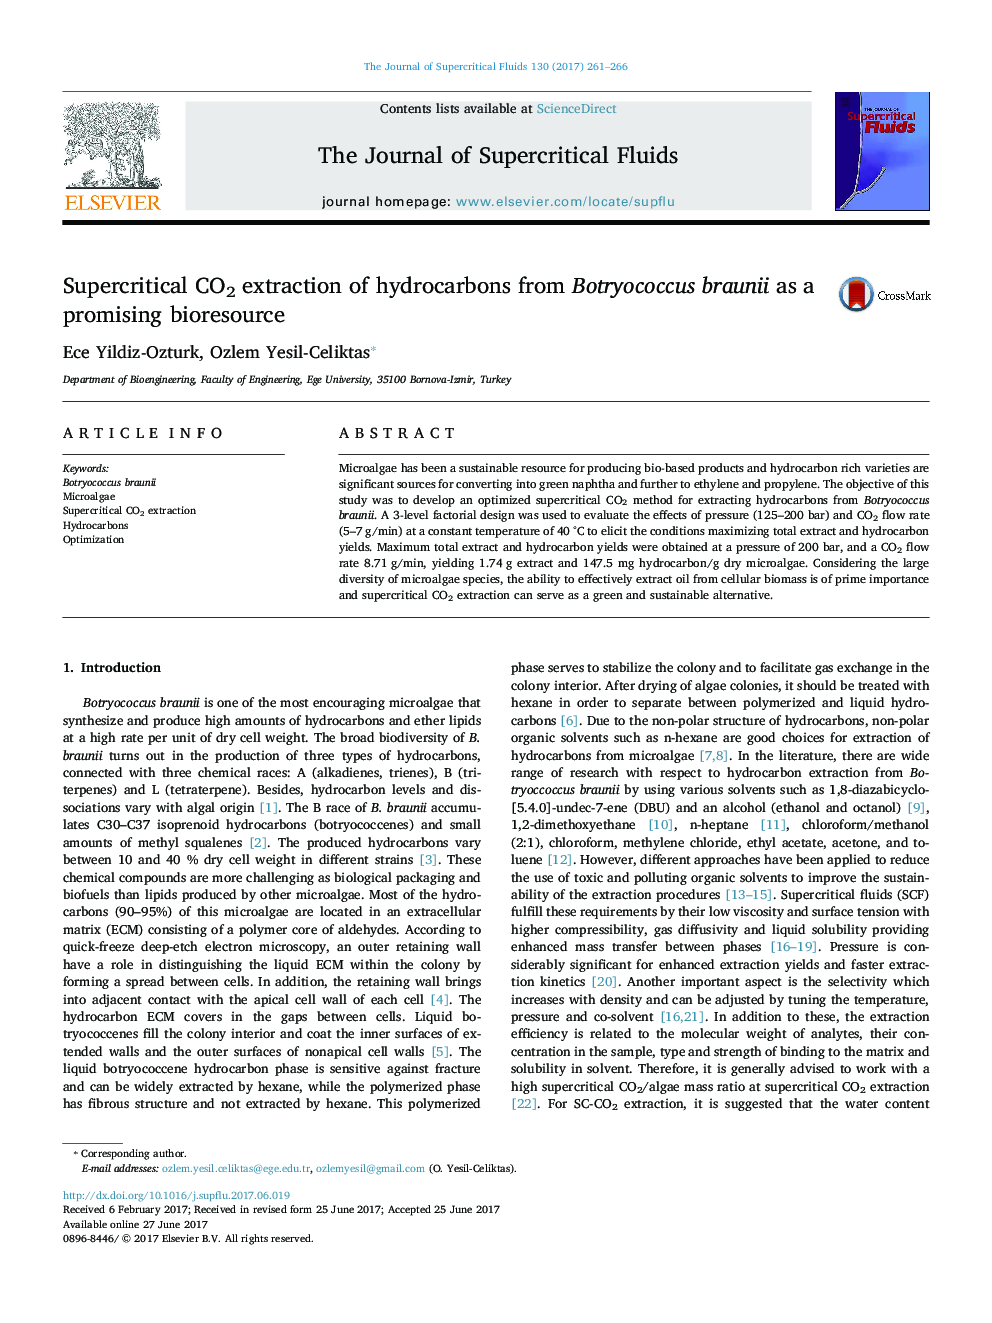 Supercritical CO2 extraction of hydrocarbons from Botryococcus braunii as a promising bioresource